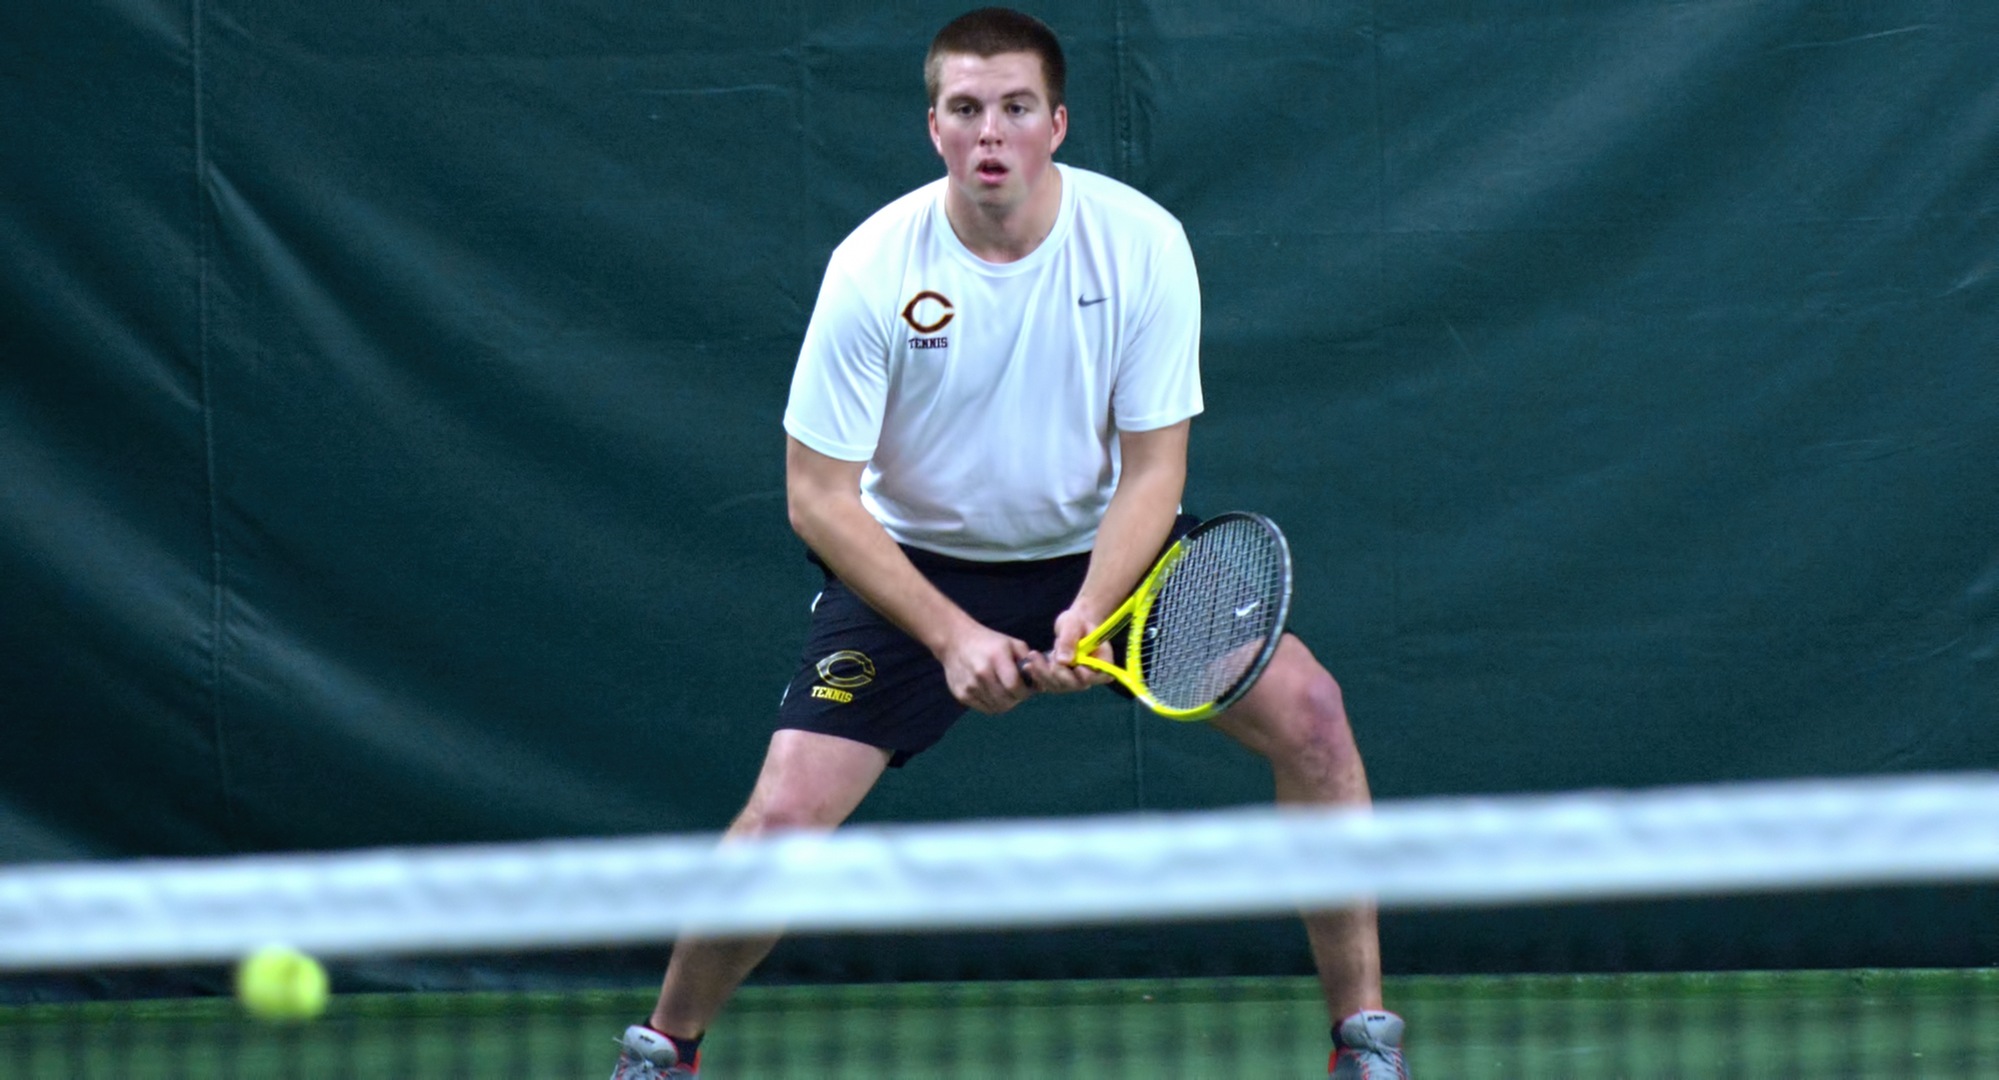 Junior Isaac Toivonen recorded a straight-set win against Macalester against the same opponent who swept him last season.